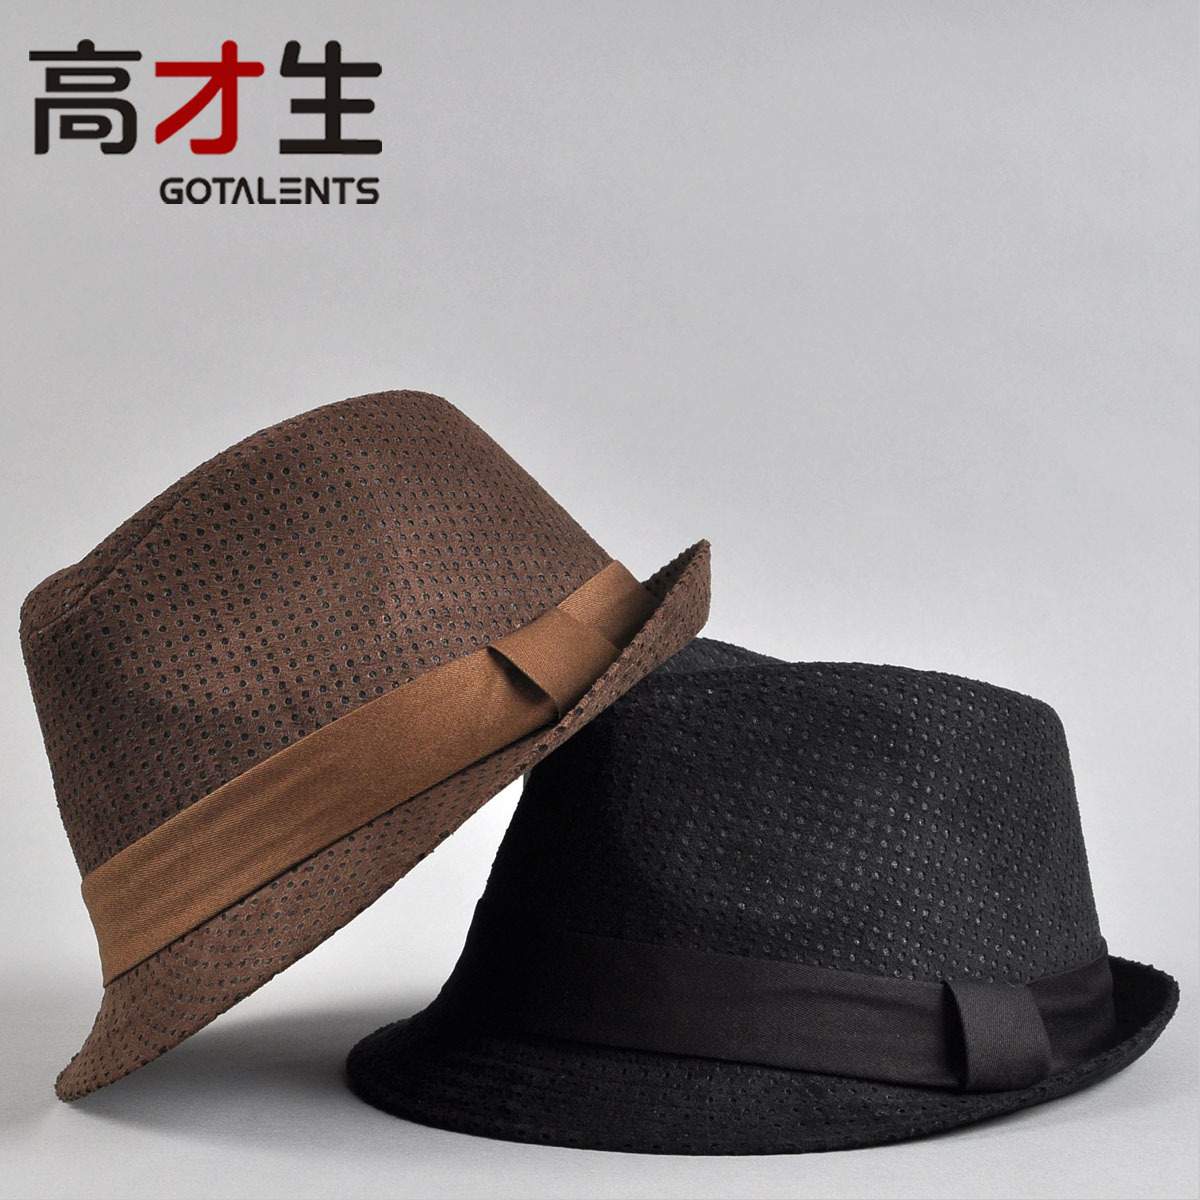 Autumn and winter male hat male fashion women's dome fedoras jazz hat